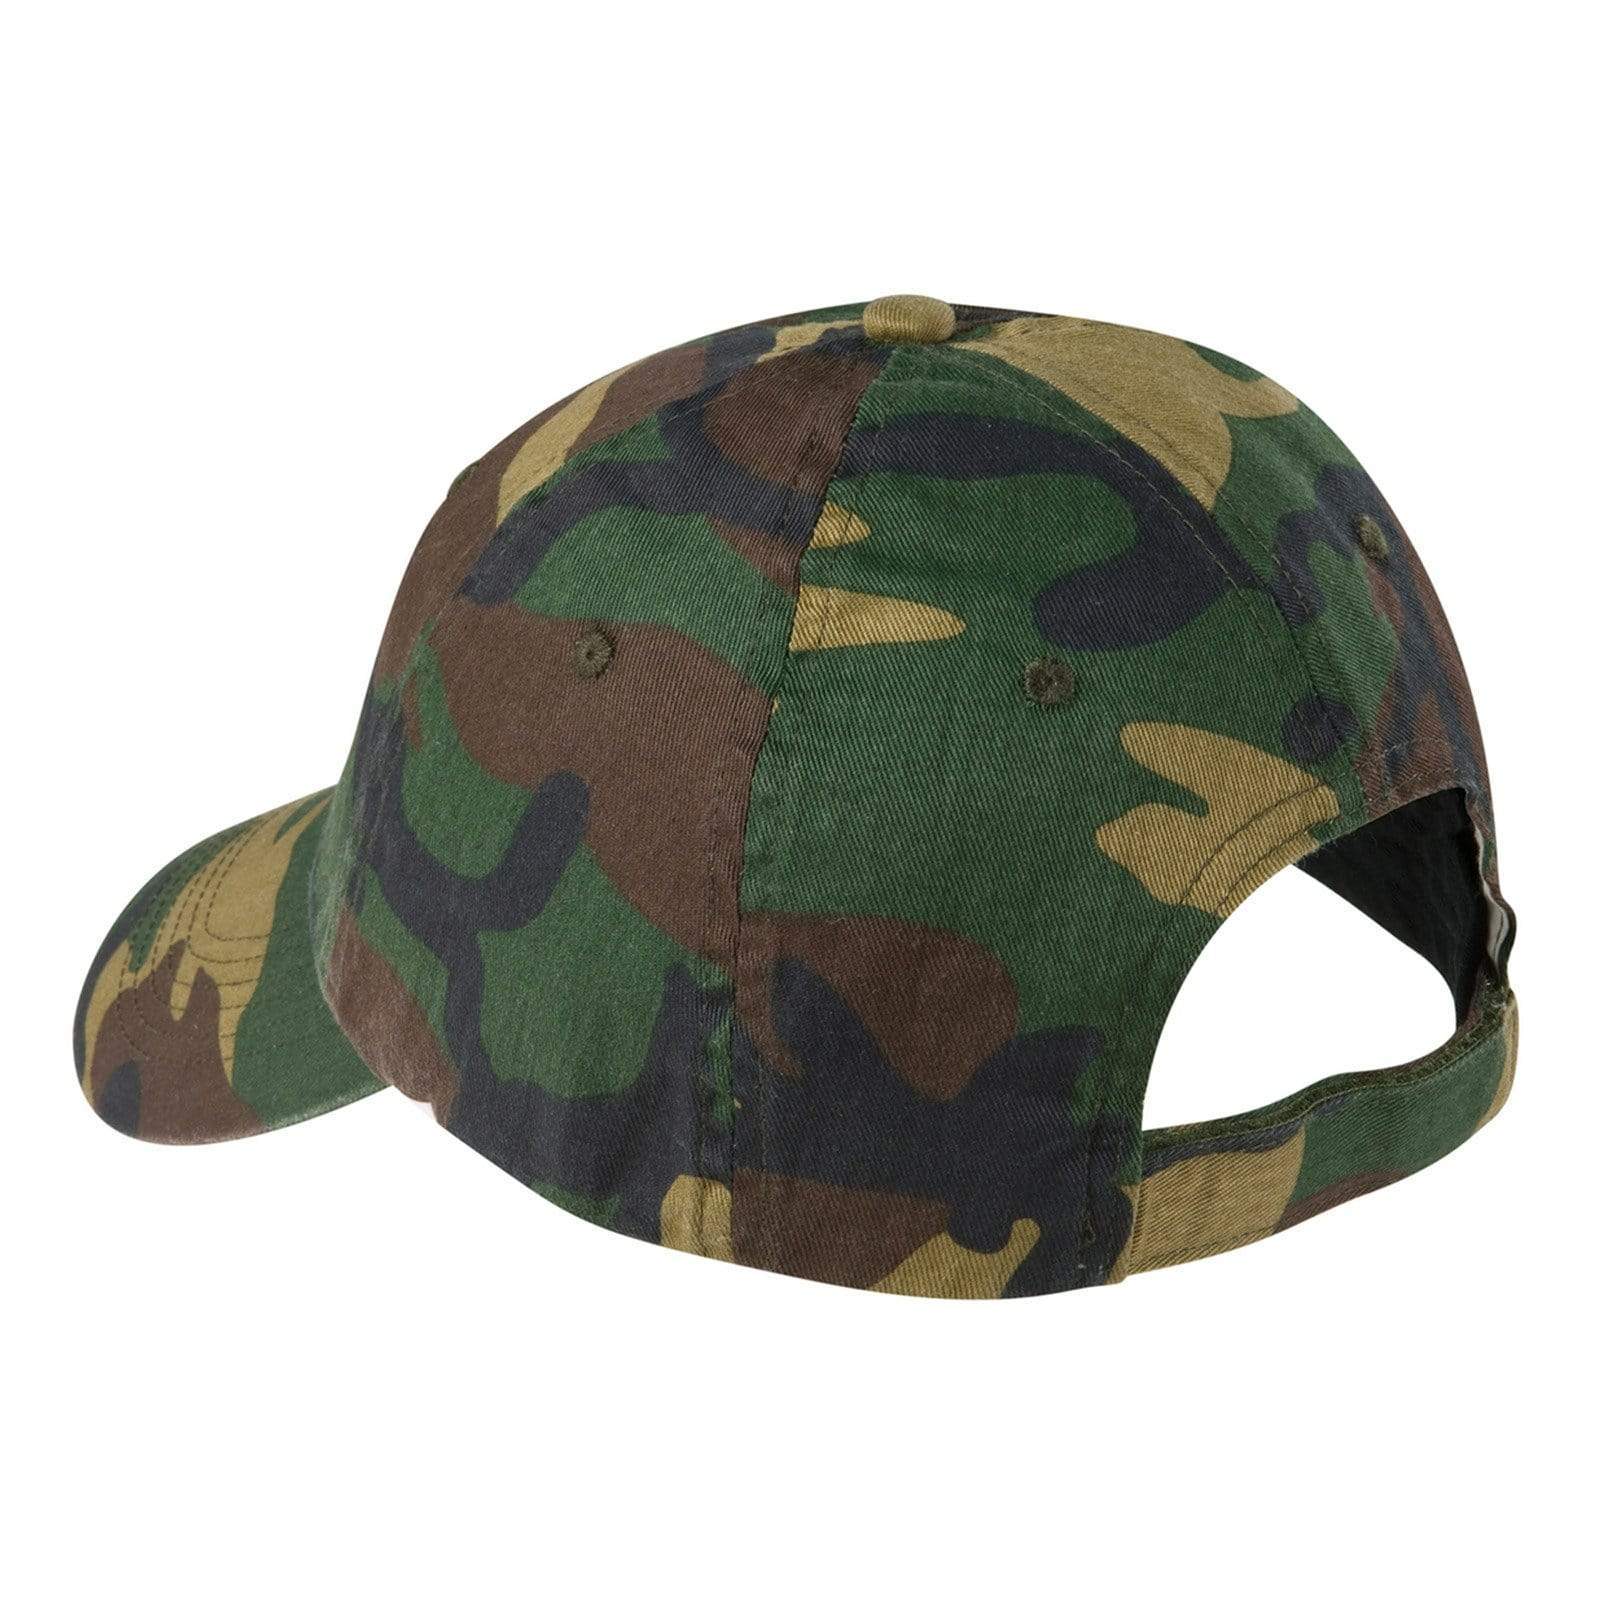 Rugby Imports US Rugby Camo Flag Hat